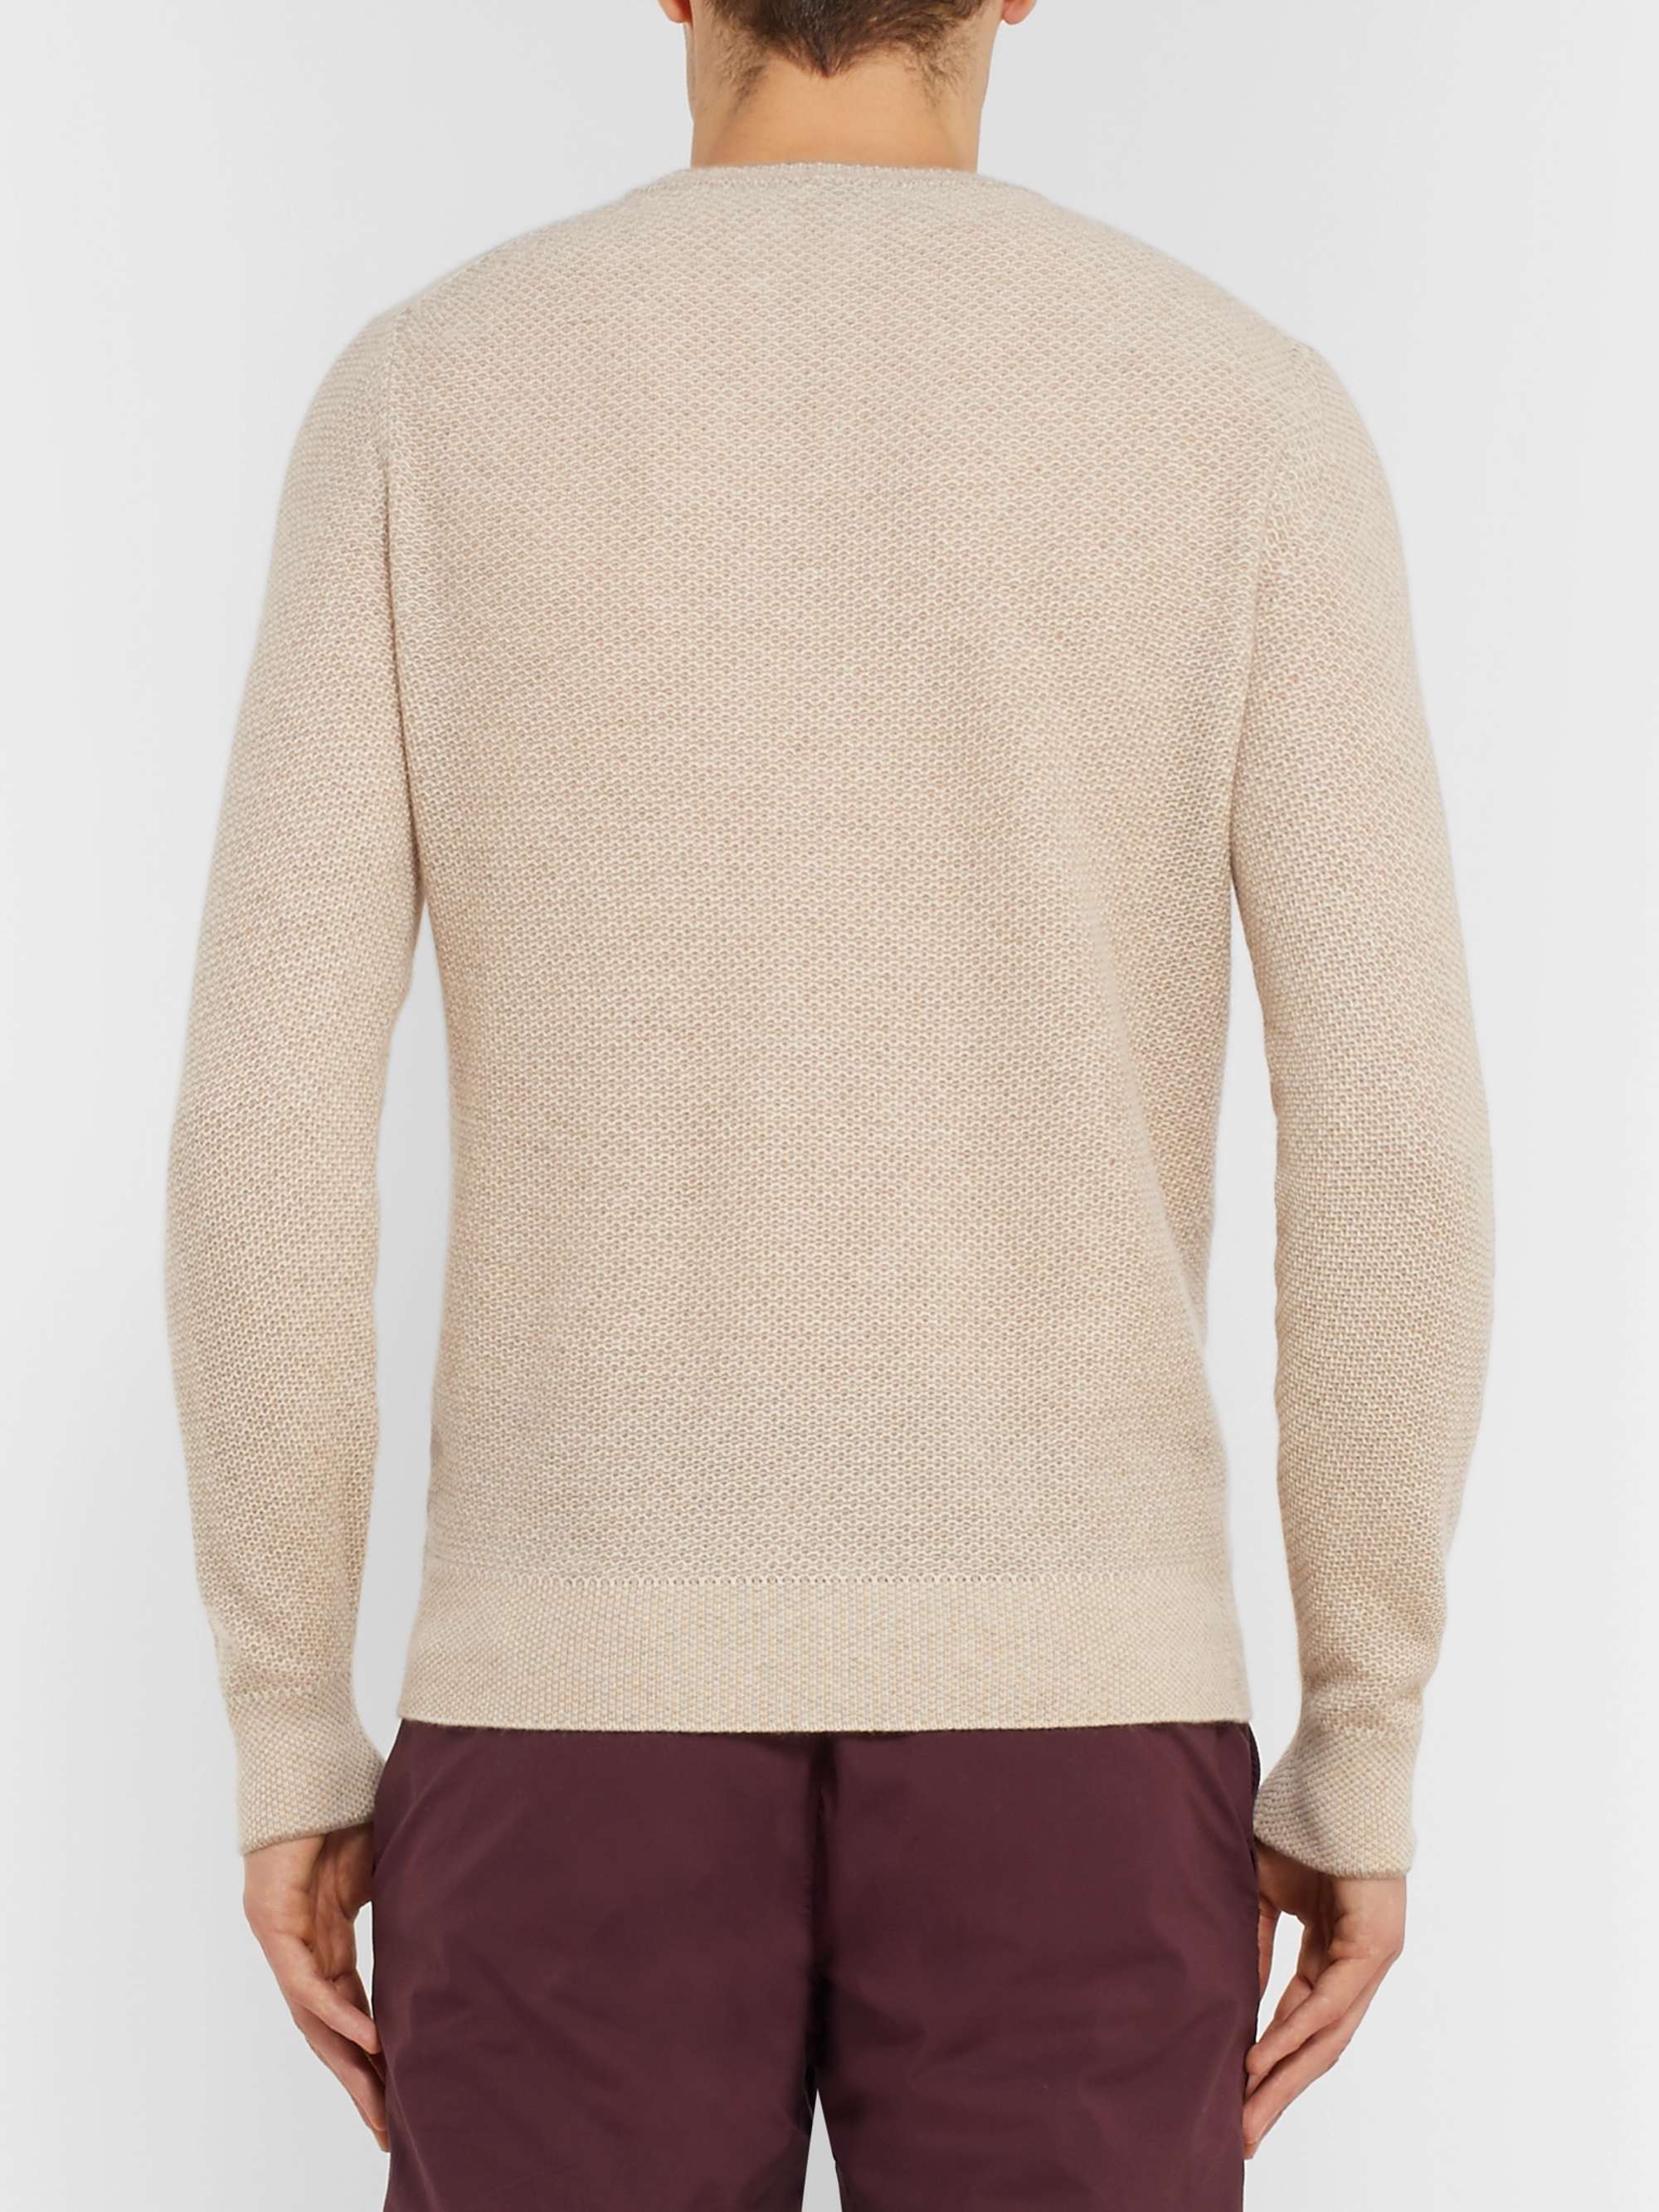 LORO PIANA Slim-Fit Waffle-Knit Baby Cashmere Sweater for Men | MR PORTER